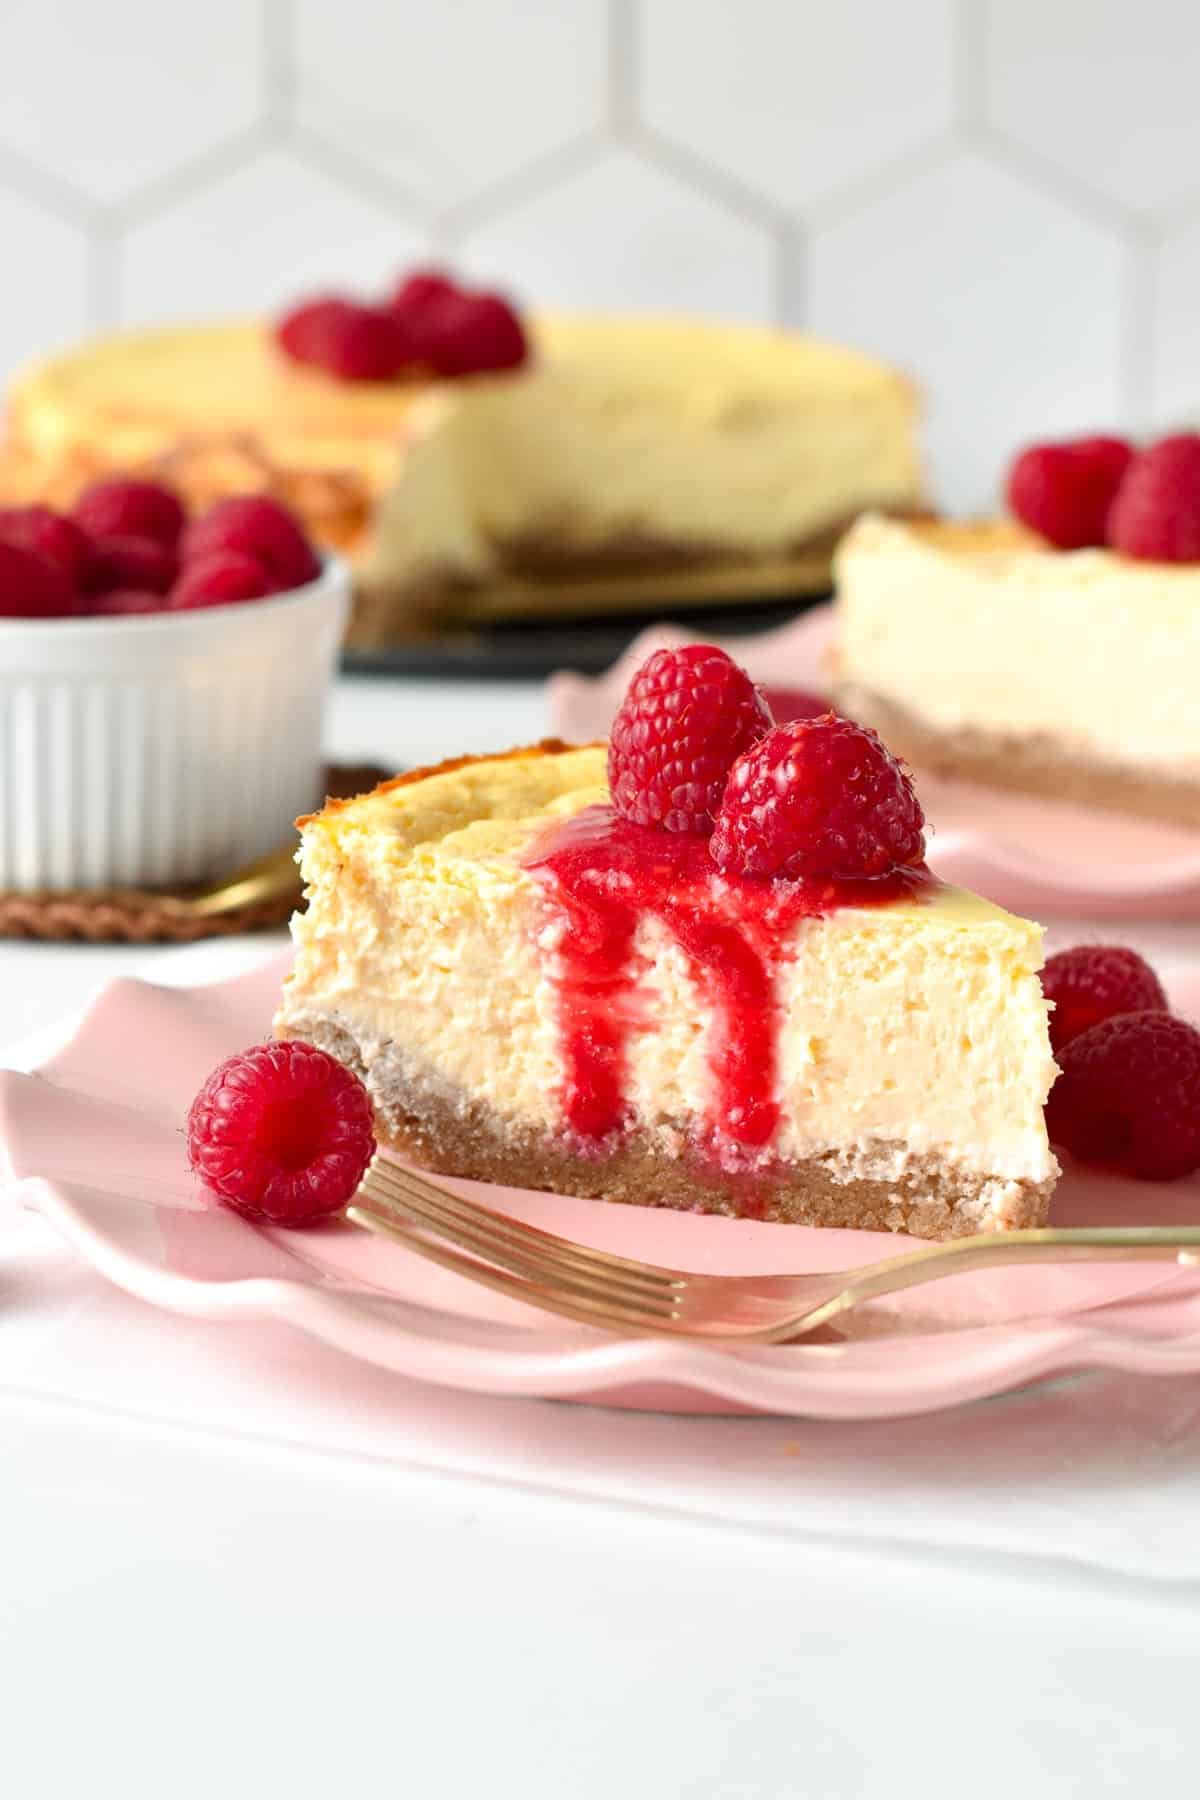 Healthy cheesecake slice on a pink plate decorated with raspberries and coulis.